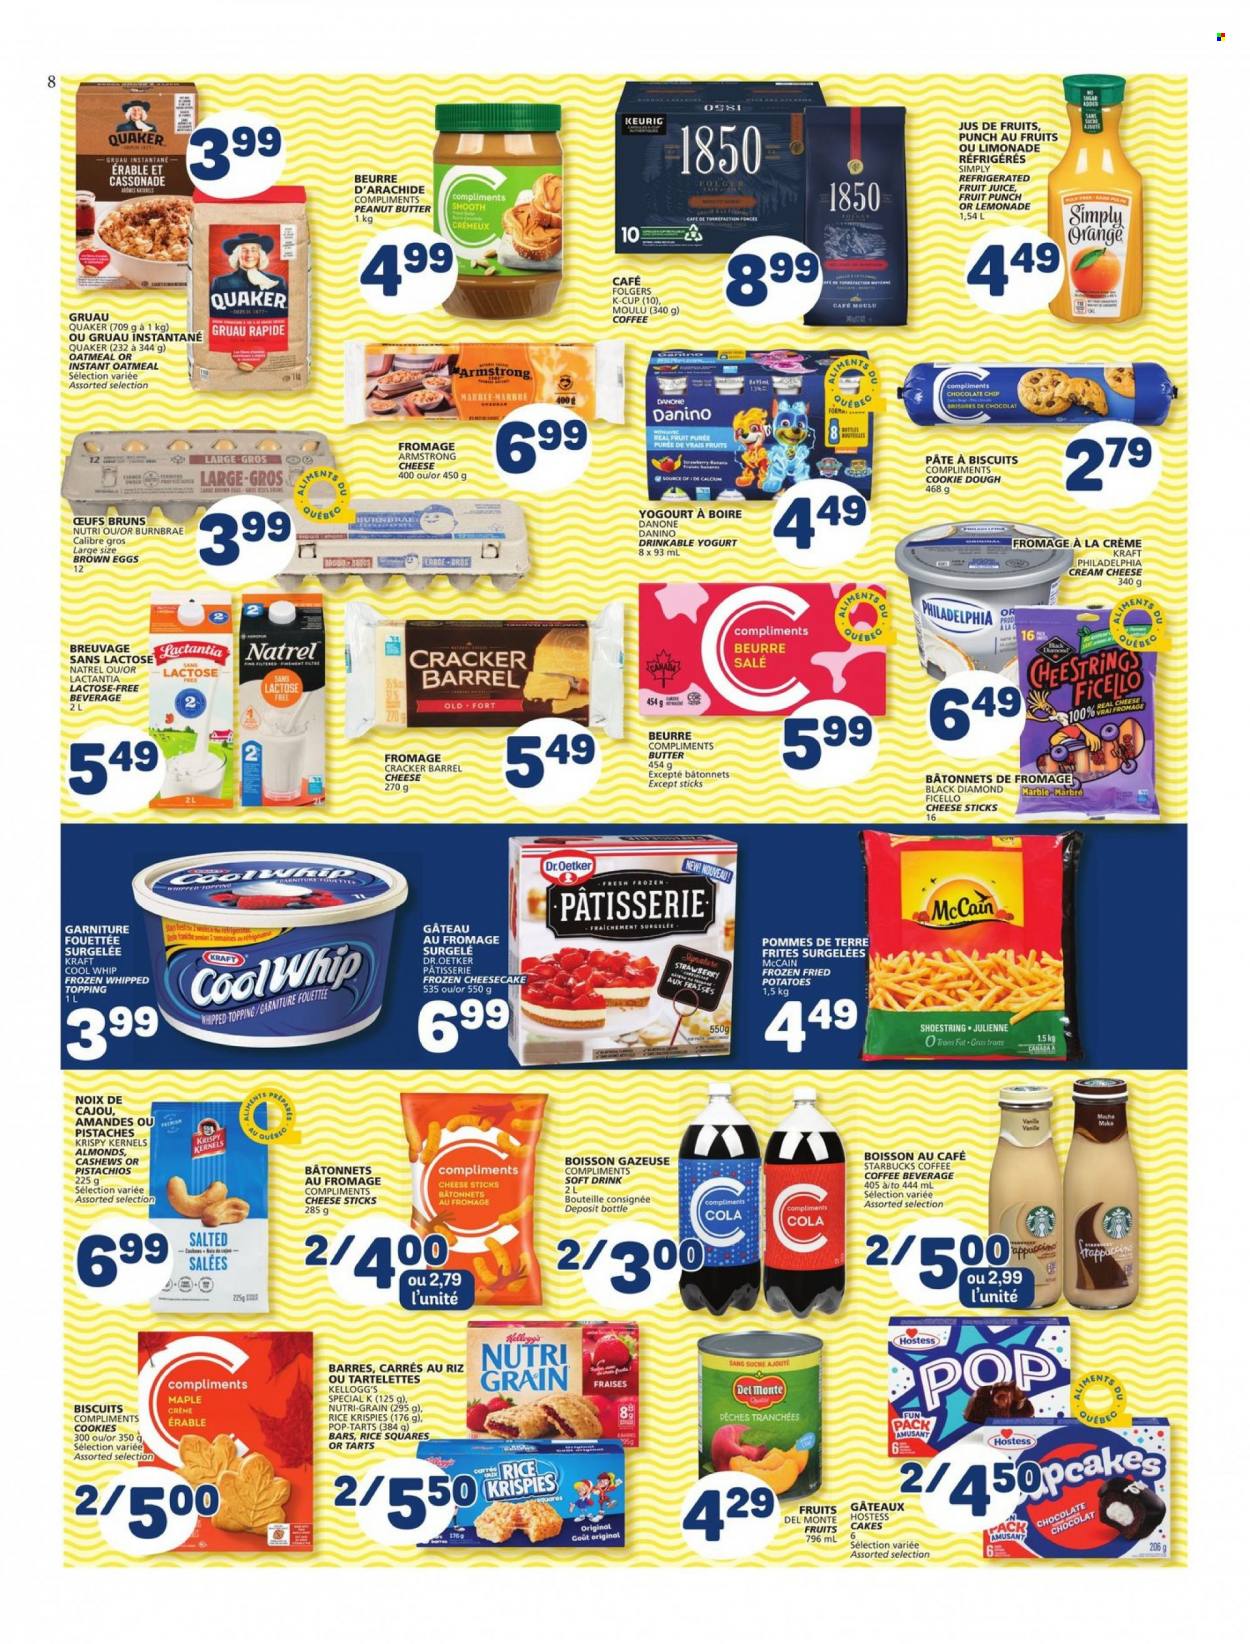 thumbnail - Marché Bonichoix Flyer - May 19, 2022 - May 25, 2022 - Sales products - cake, cheesecake, potatoes, Quaker, Kraft®, cream cheese, cheese, Dr. Oetker, yoghurt, eggs, Cool Whip, cheese sticks, McCain, cookie dough, cookies, crackers, Kellogg's, biscuit, Pop-Tarts, oatmeal, topping, Rice Krispies, Nutri-Grain, peanut butter, almonds, cashews, pistachios, lemonade, juice, fruit juice, soft drink, Oros, fruit punch, coffee, Folgers, coffee capsules, Starbucks, K-Cups, Keurig, Ron Pelicano, Philadelphia, Danone. Page 8.